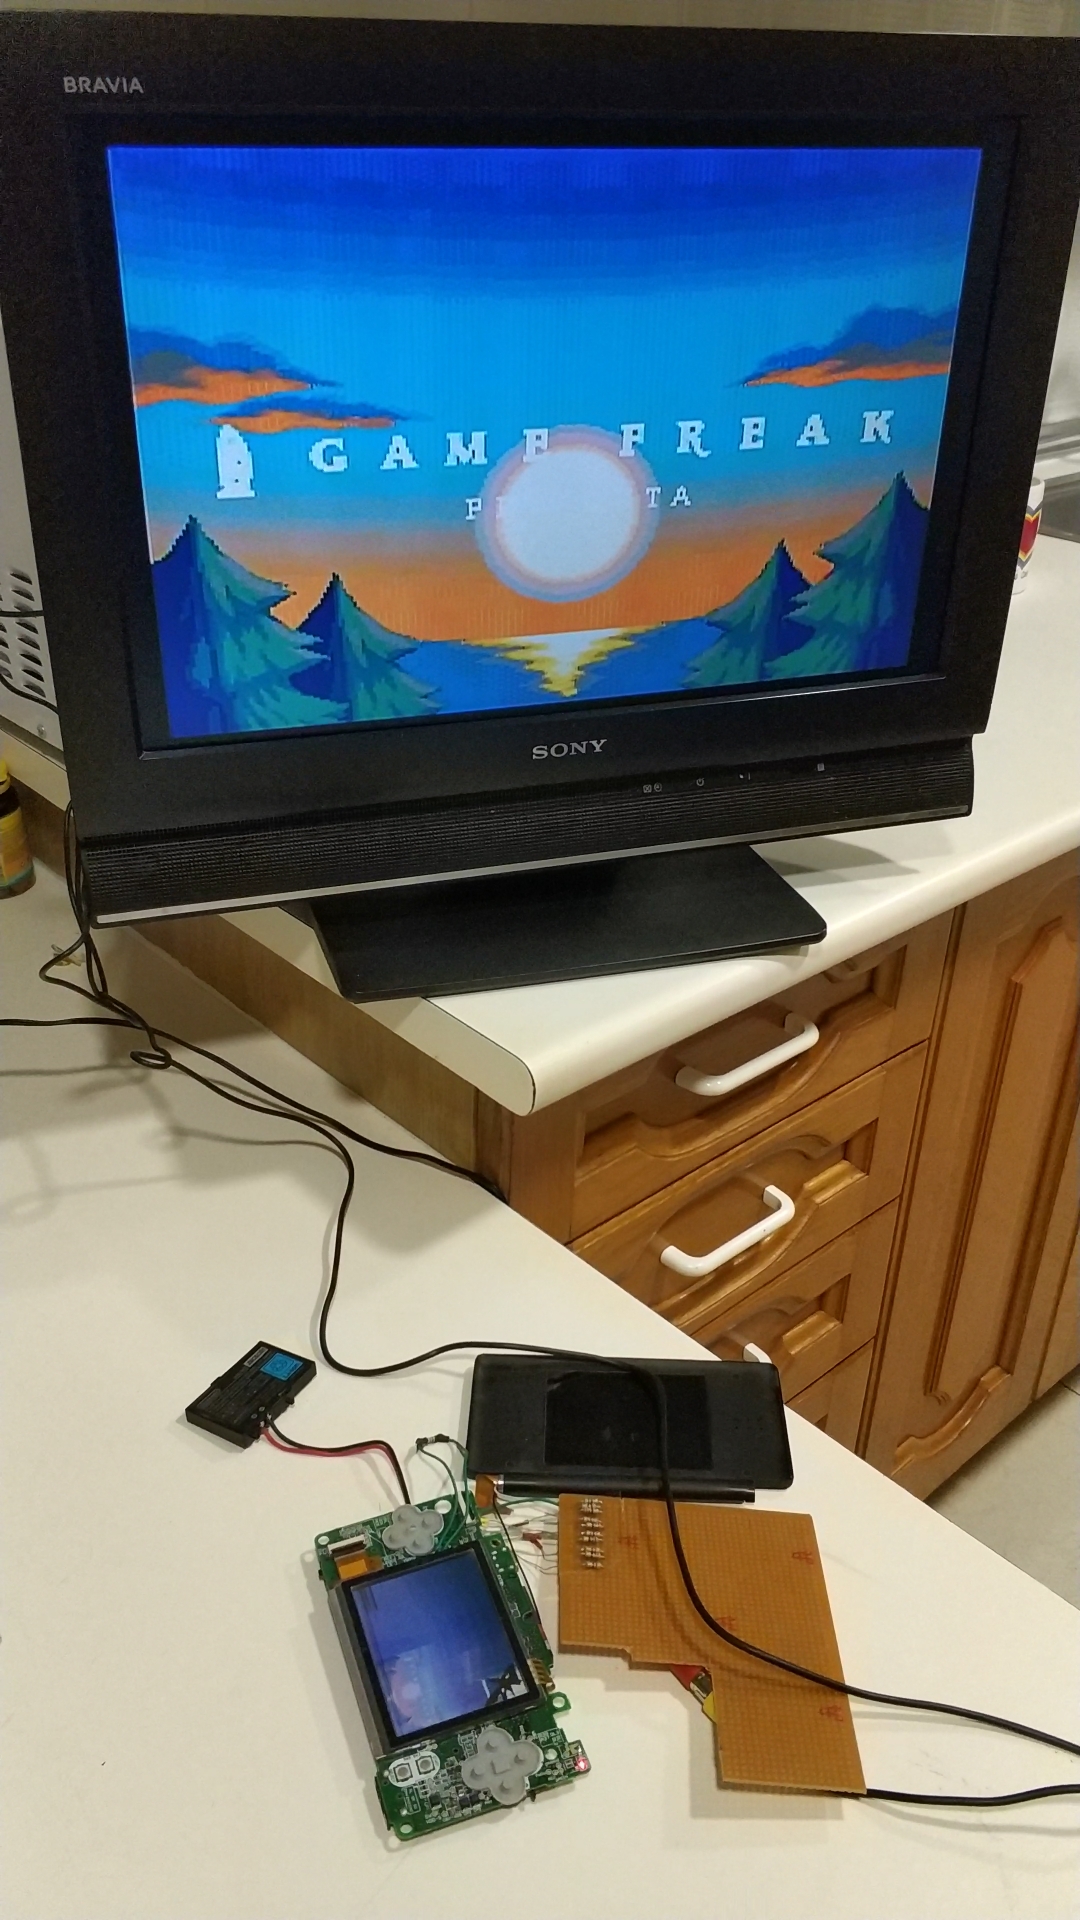 Nintendo Ds Liteでテレビへの出力を可能に Lost Nds Tv By Lost Nintendo History 大人のためのゲーム講座